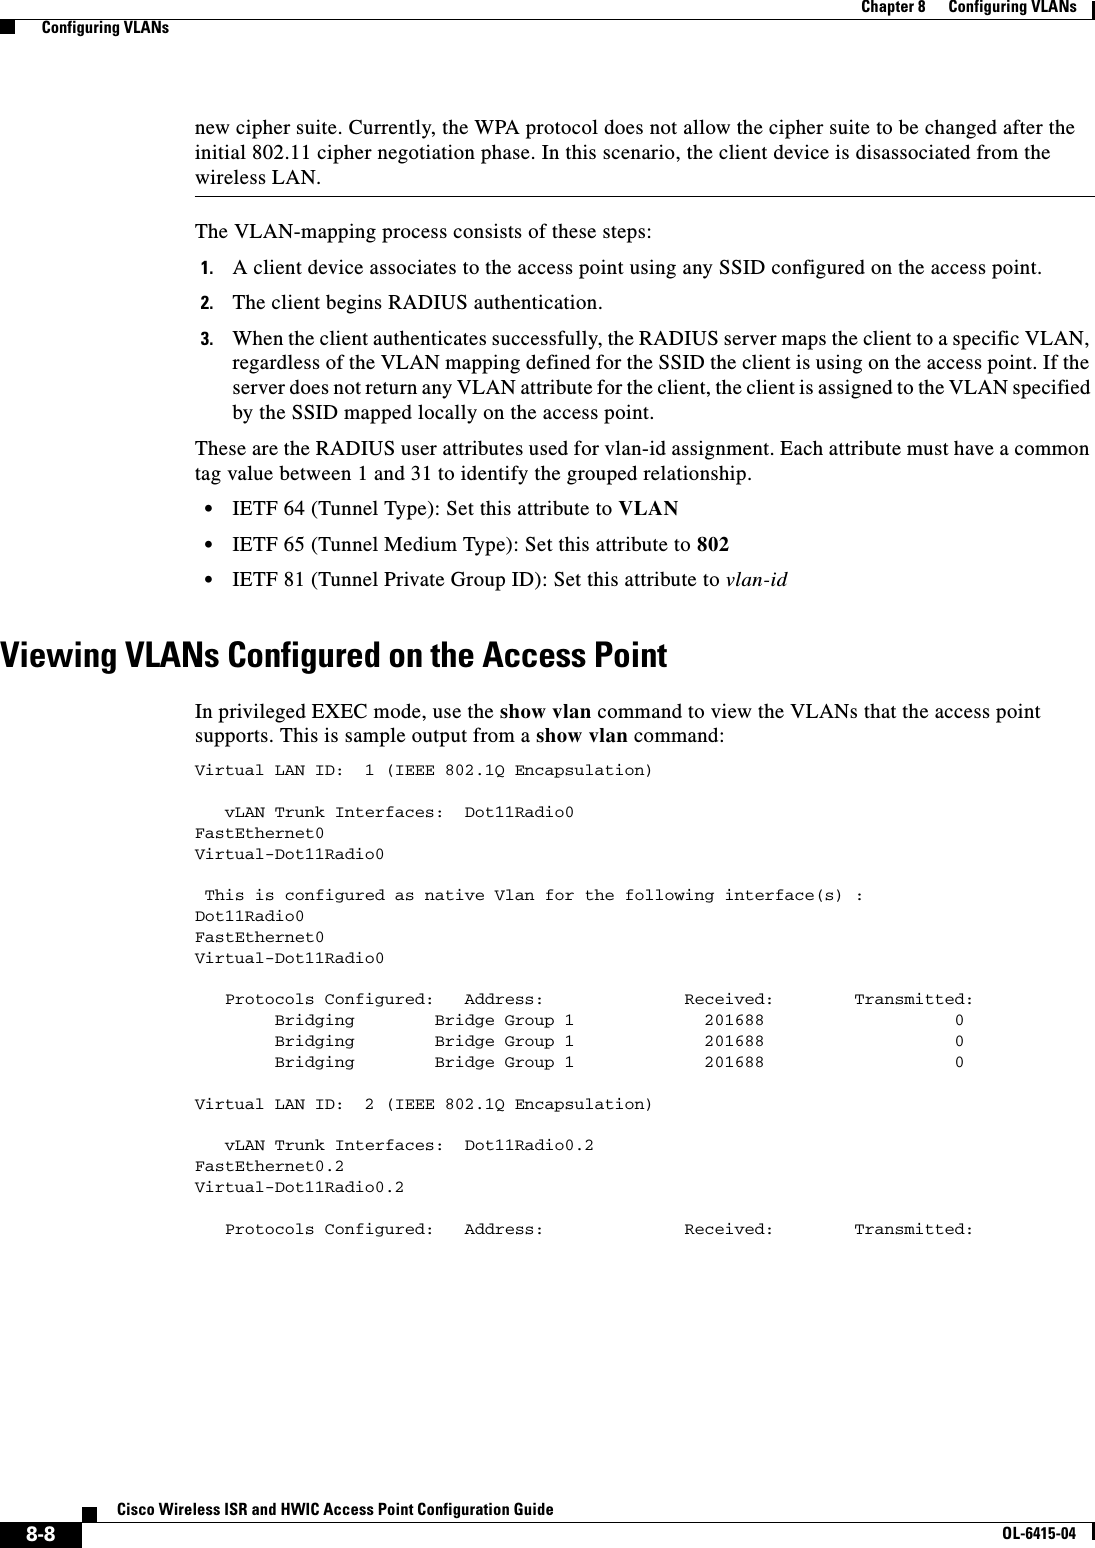  8-8Cisco Wireless ISR and HWIC Access Point Configuration GuideOL-6415-04Chapter 8      Configuring VLANs  Configuring VLANsnew cipher suite. Currently, the WPA protocol does not allow the cipher suite to be changed after the initial 802.11 cipher negotiation phase. In this scenario, the client device is disassociated from the wireless LAN. The VLAN-mapping process consists of these steps:1. A client device associates to the access point using any SSID configured on the access point. 2. The client begins RADIUS authentication.3. When the client authenticates successfully, the RADIUS server maps the client to a specific VLAN, regardless of the VLAN mapping defined for the SSID the client is using on the access point. If the server does not return any VLAN attribute for the client, the client is assigned to the VLAN specified by the SSID mapped locally on the access point.These are the RADIUS user attributes used for vlan-id assignment. Each attribute must have a common tag value between 1 and 31 to identify the grouped relationship.  • IETF 64 (Tunnel Type): Set this attribute to VLAN  • IETF 65 (Tunnel Medium Type): Set this attribute to 802  • IETF 81 (Tunnel Private Group ID): Set this attribute to vlan-idViewing VLANs Configured on the Access PointIn privileged EXEC mode, use the show vlan command to view the VLANs that the access point supports. This is sample output from a show vlan command:Virtual LAN ID:  1 (IEEE 802.1Q Encapsulation)   vLAN Trunk Interfaces:  Dot11Radio0FastEthernet0Virtual-Dot11Radio0 This is configured as native Vlan for the following interface(s) :Dot11Radio0FastEthernet0Virtual-Dot11Radio0   Protocols Configured:   Address:              Received:        Transmitted:        Bridging        Bridge Group 1             201688                   0        Bridging        Bridge Group 1             201688                   0        Bridging        Bridge Group 1             201688                   0Virtual LAN ID:  2 (IEEE 802.1Q Encapsulation)   vLAN Trunk Interfaces:  Dot11Radio0.2FastEthernet0.2Virtual-Dot11Radio0.2   Protocols Configured:   Address:              Received:        Transmitted: